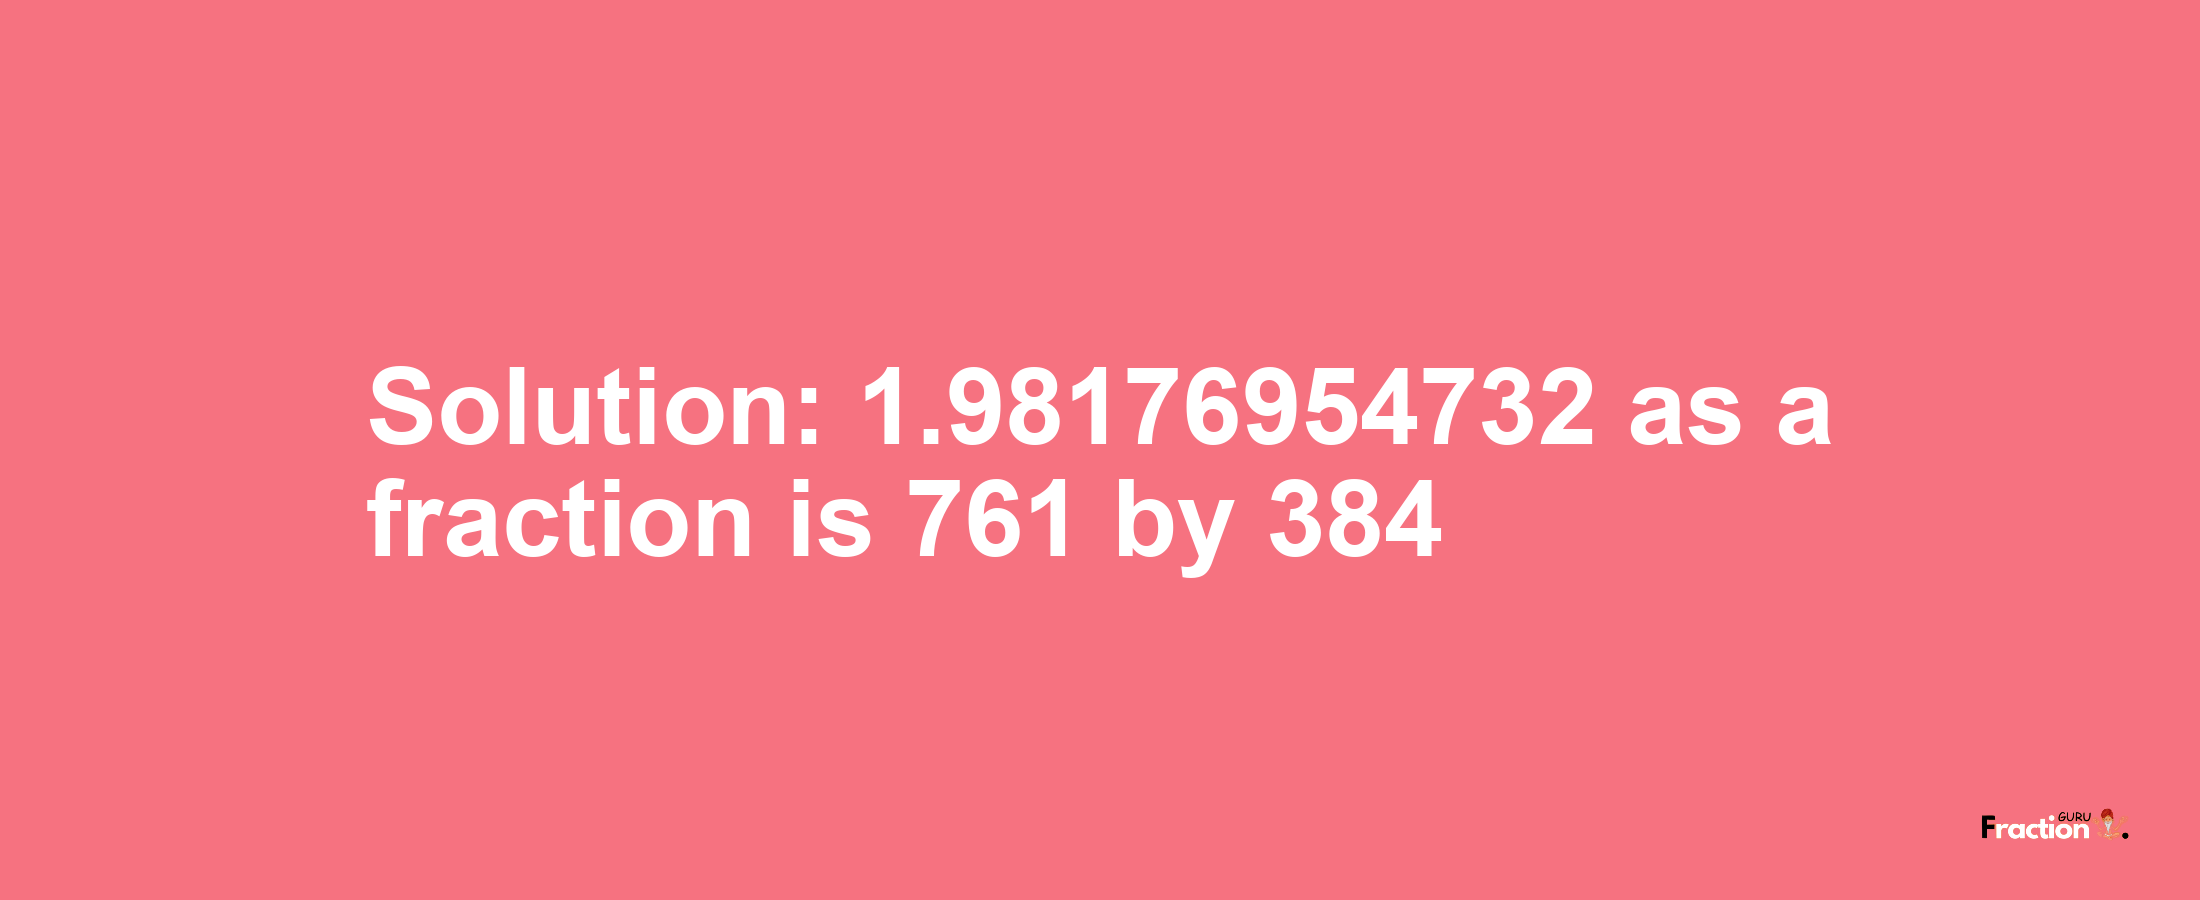 Solution:1.98176954732 as a fraction is 761/384